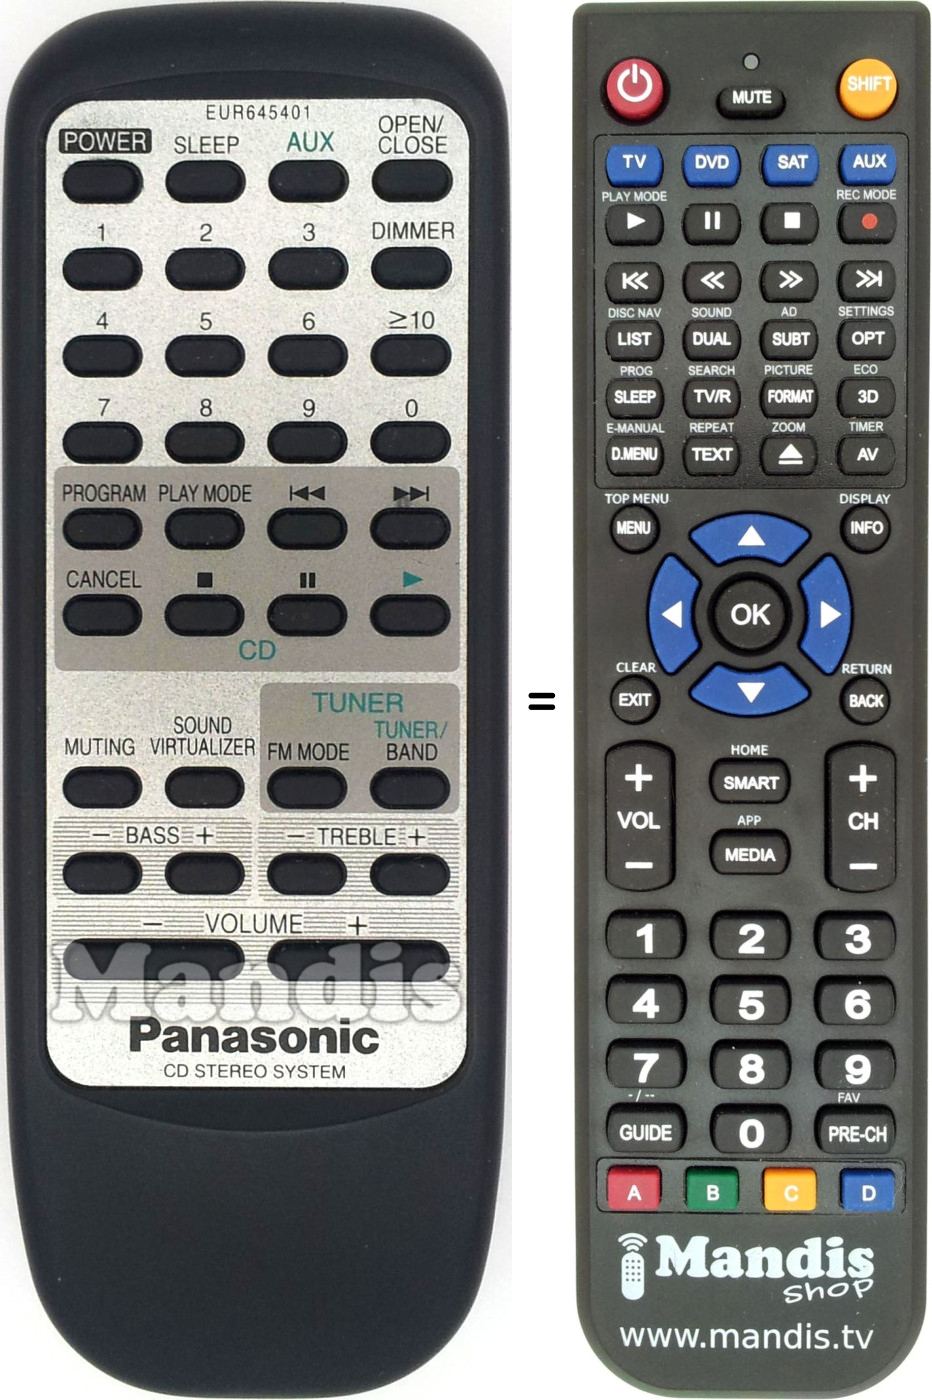 Replacement remote control EUR645401